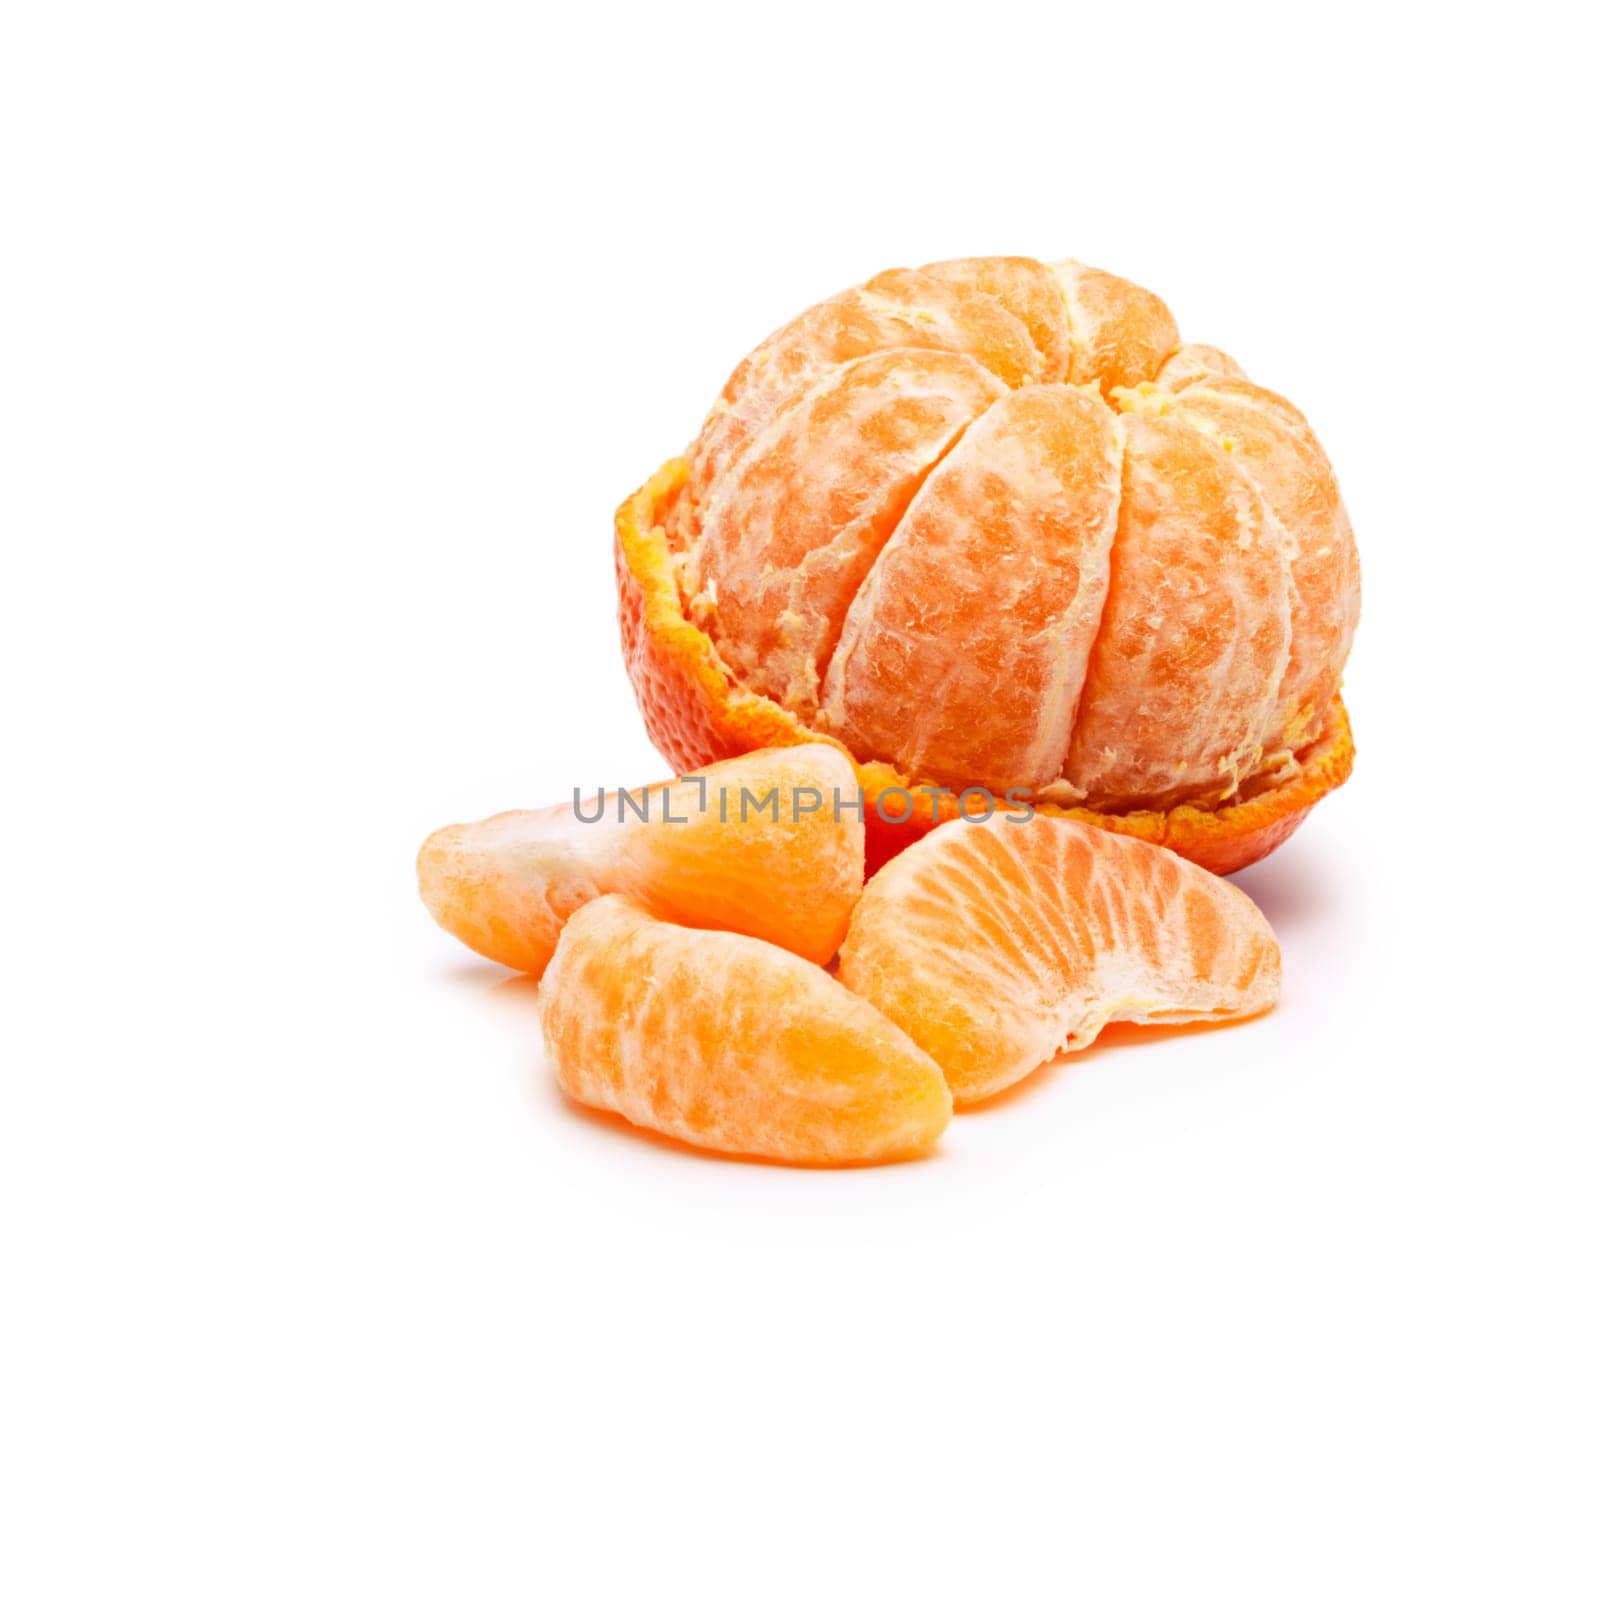 Fruit, citrus and tangerine for vitamin c, fiber and healthy nutrition on isolated white background. Food, closeup and organic produce for natural wellness, detox and eating on studio backdrop.